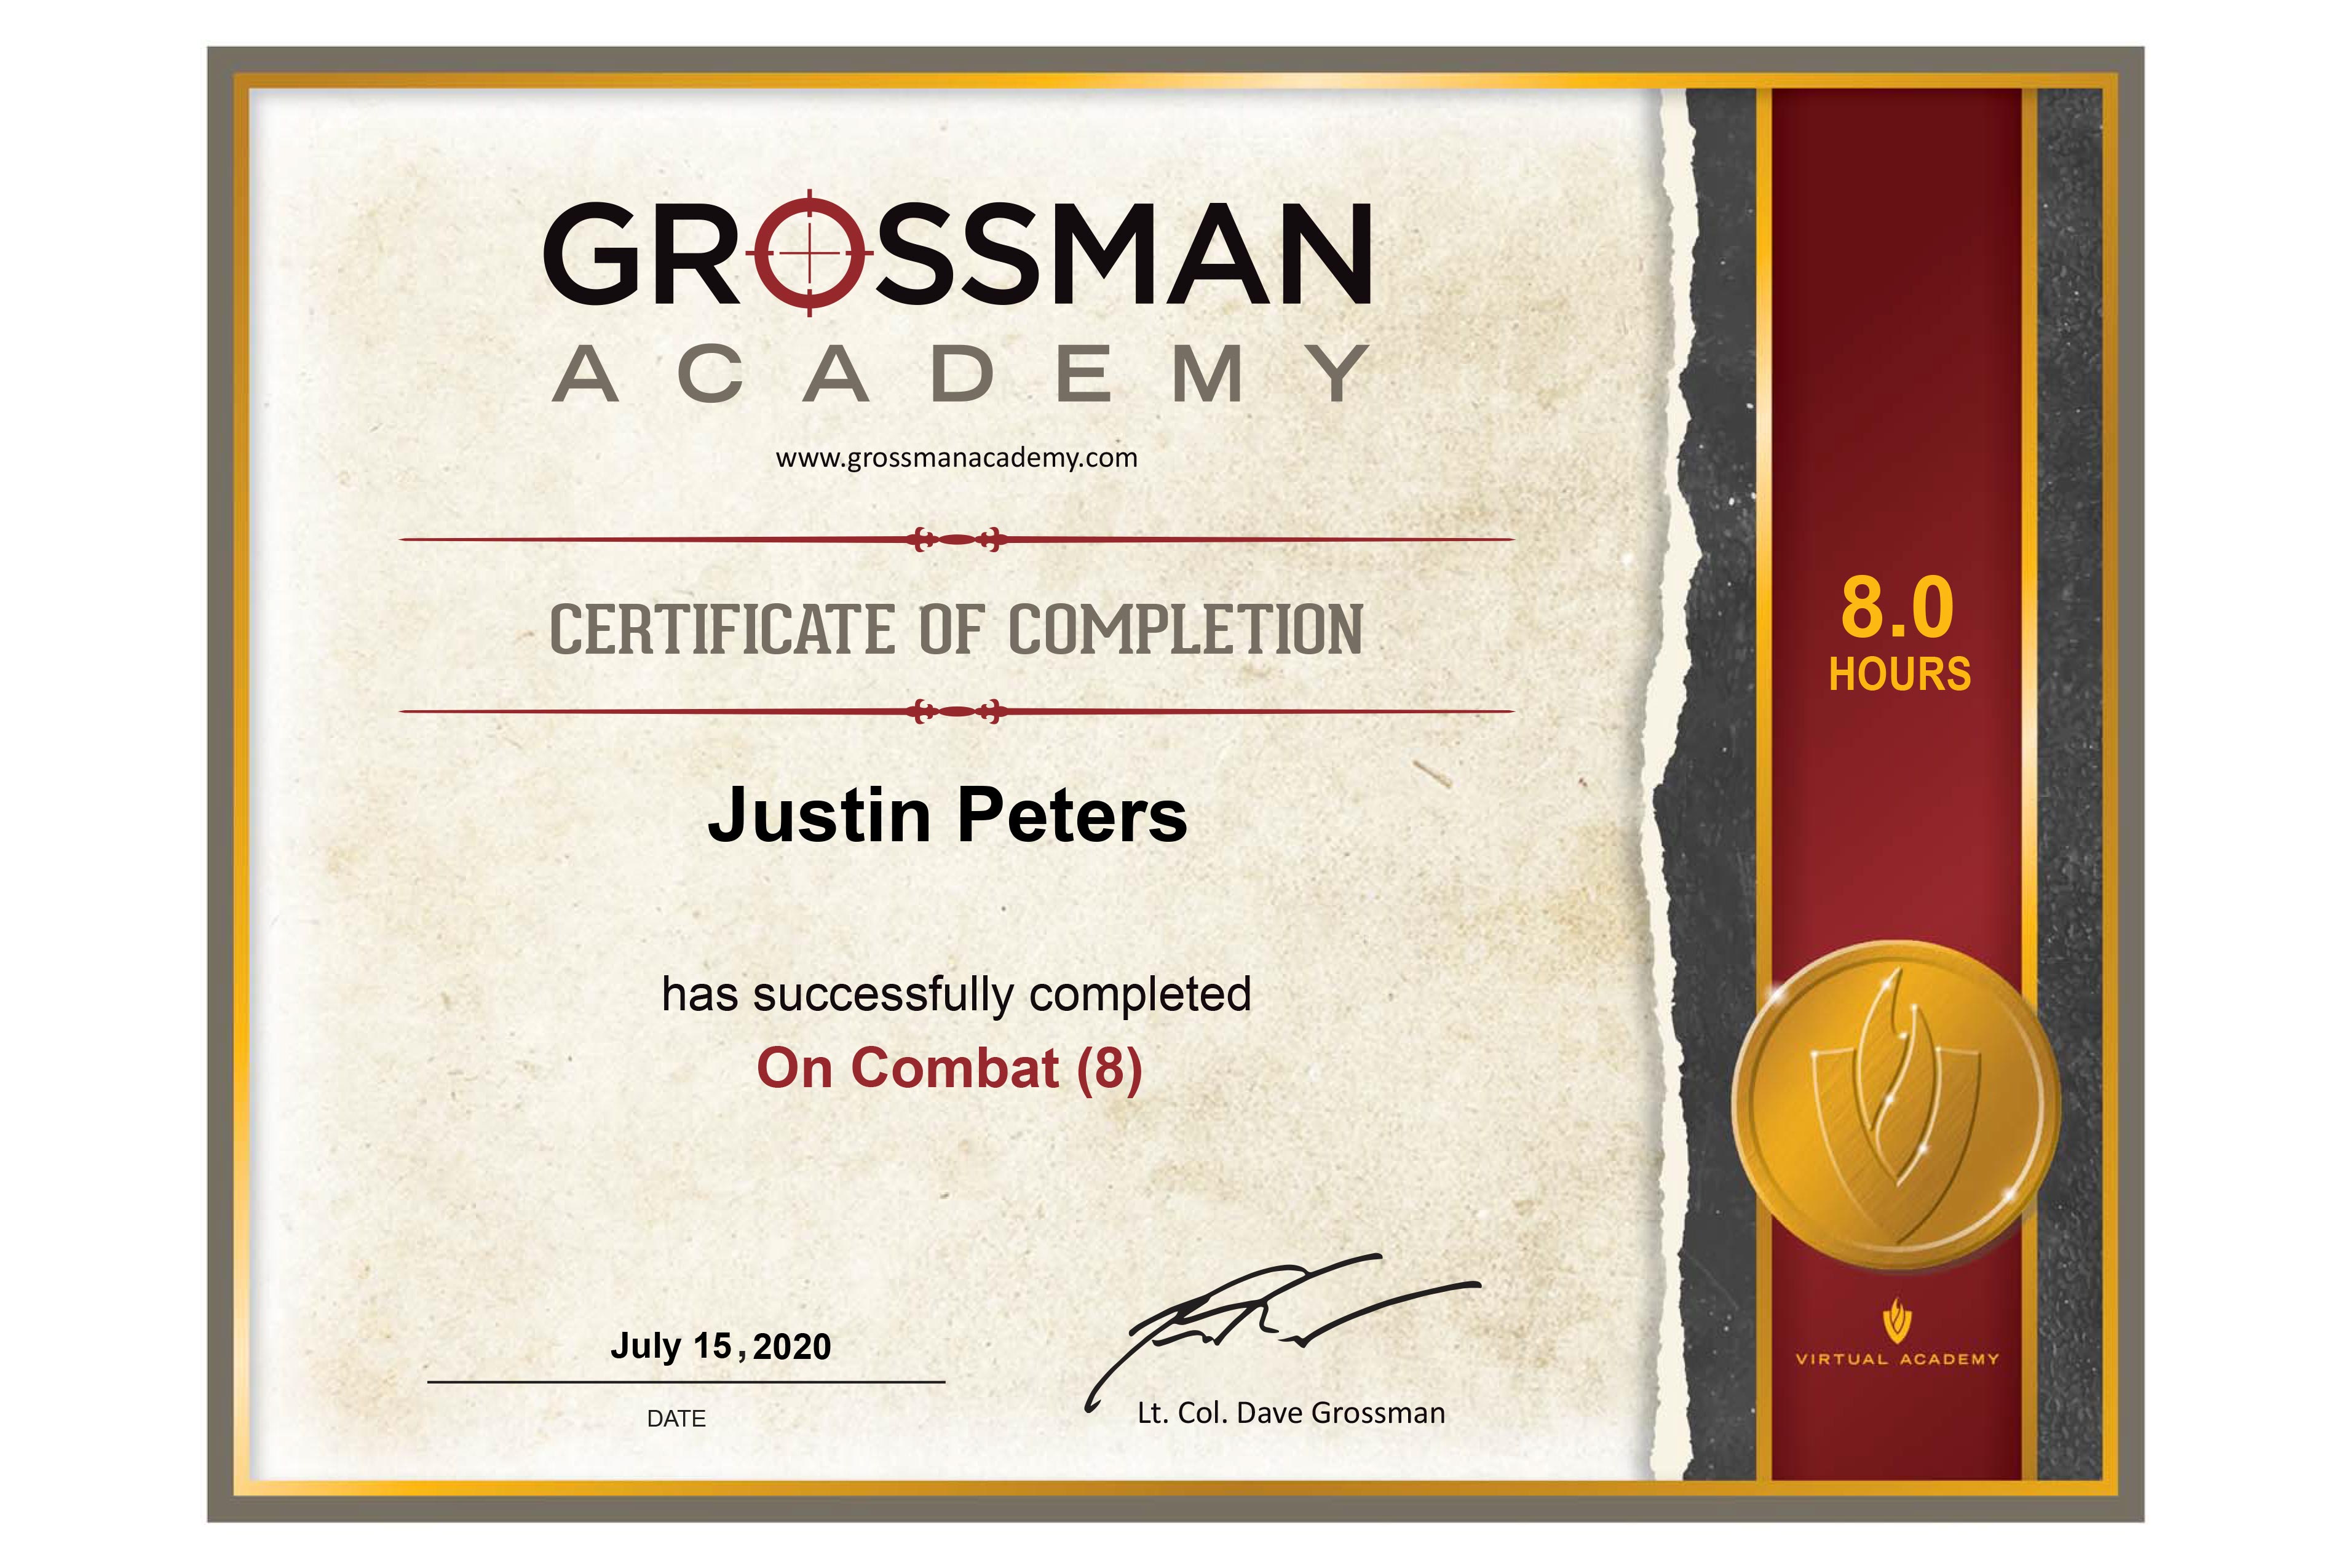 A certificate of completion for Justin Peters for the On Combat training.